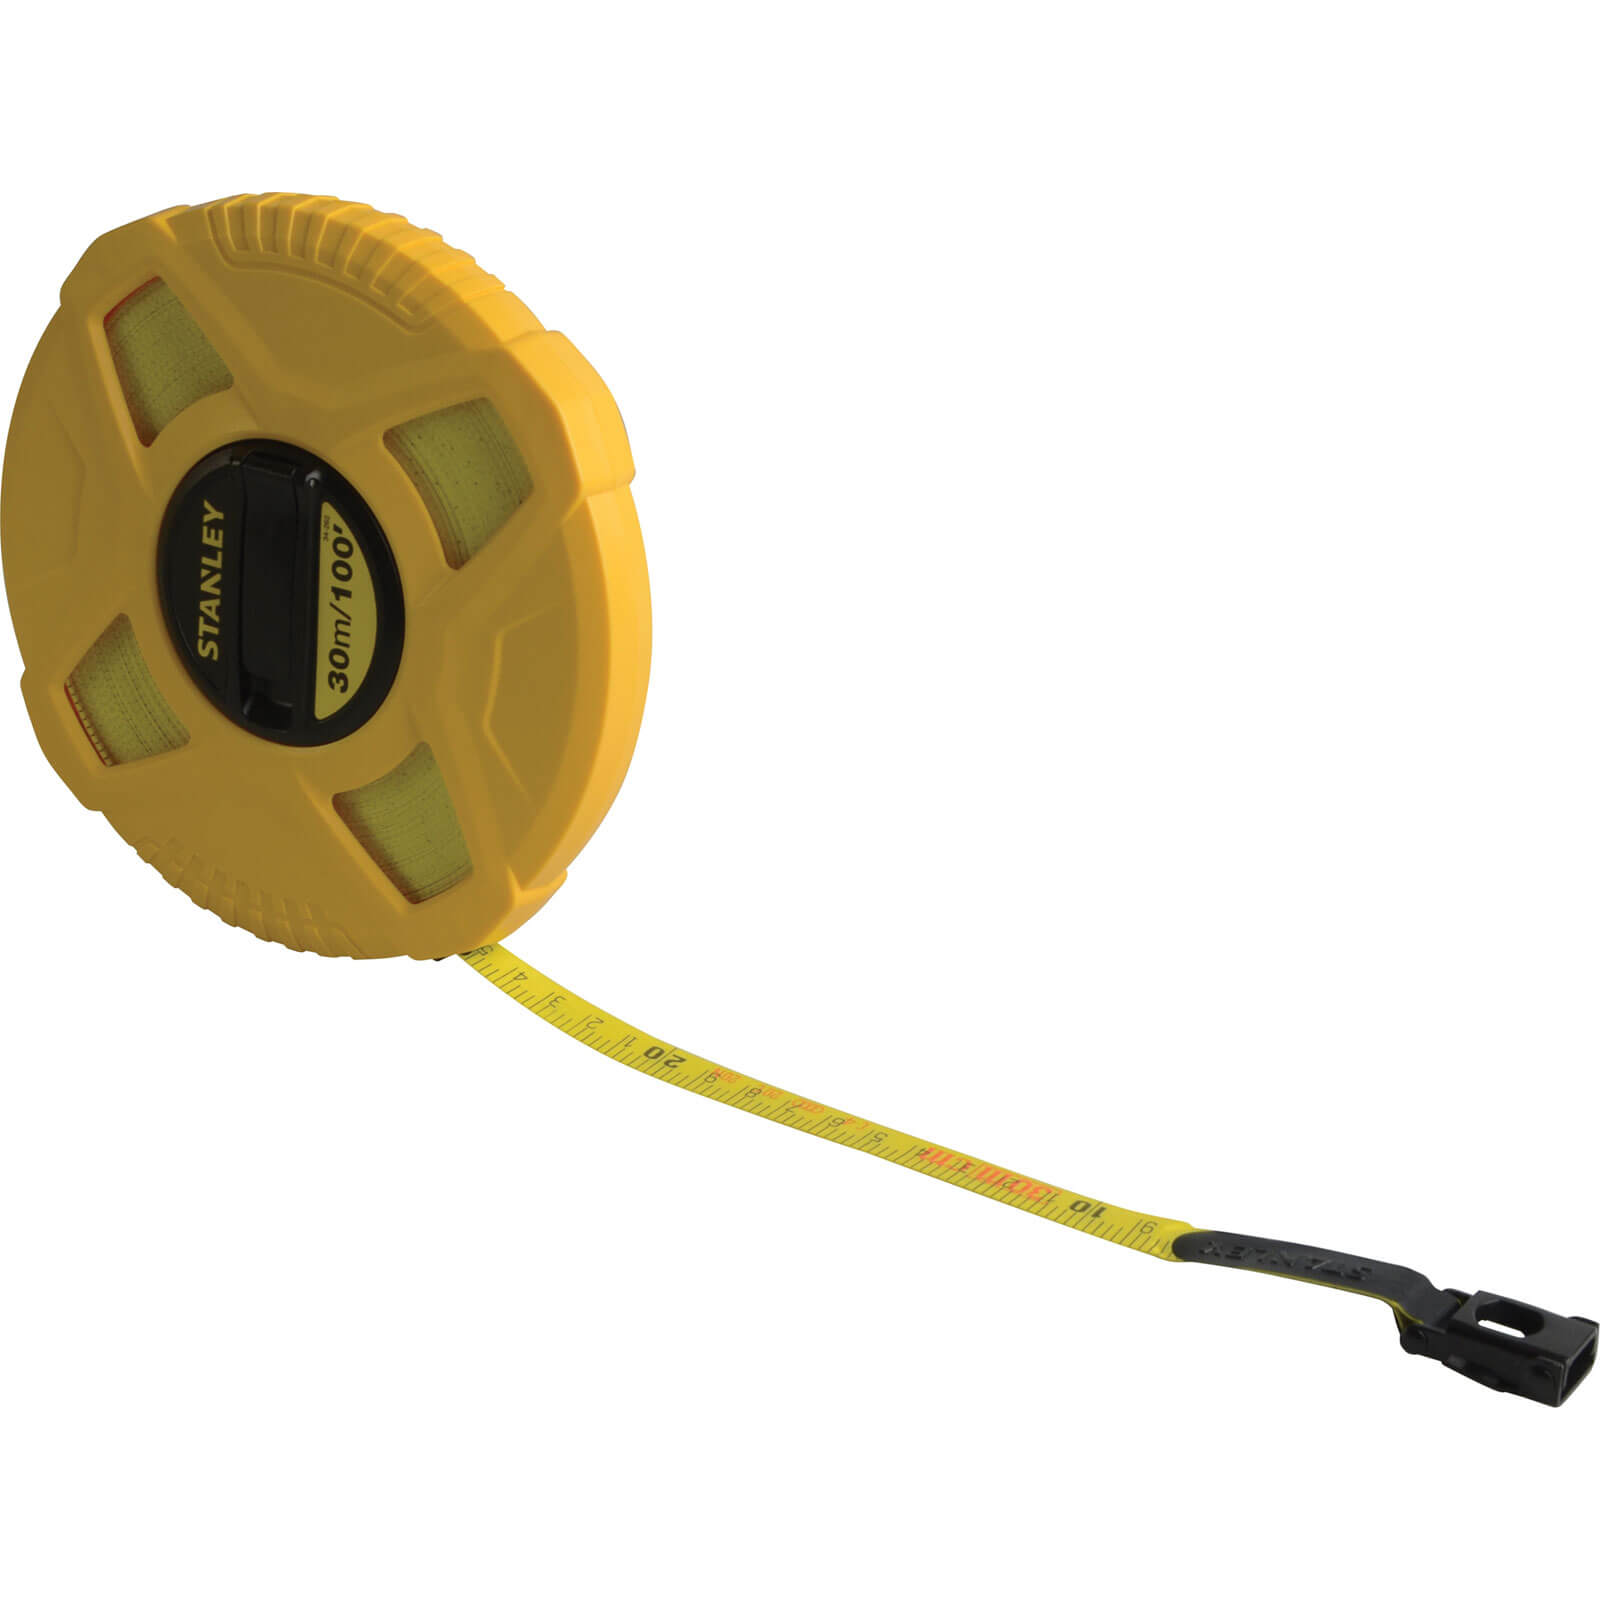 Image of Stanley Closed Case Fibreglass Tape Measure Imperial & Metric 100ft / 30m 12.7mm